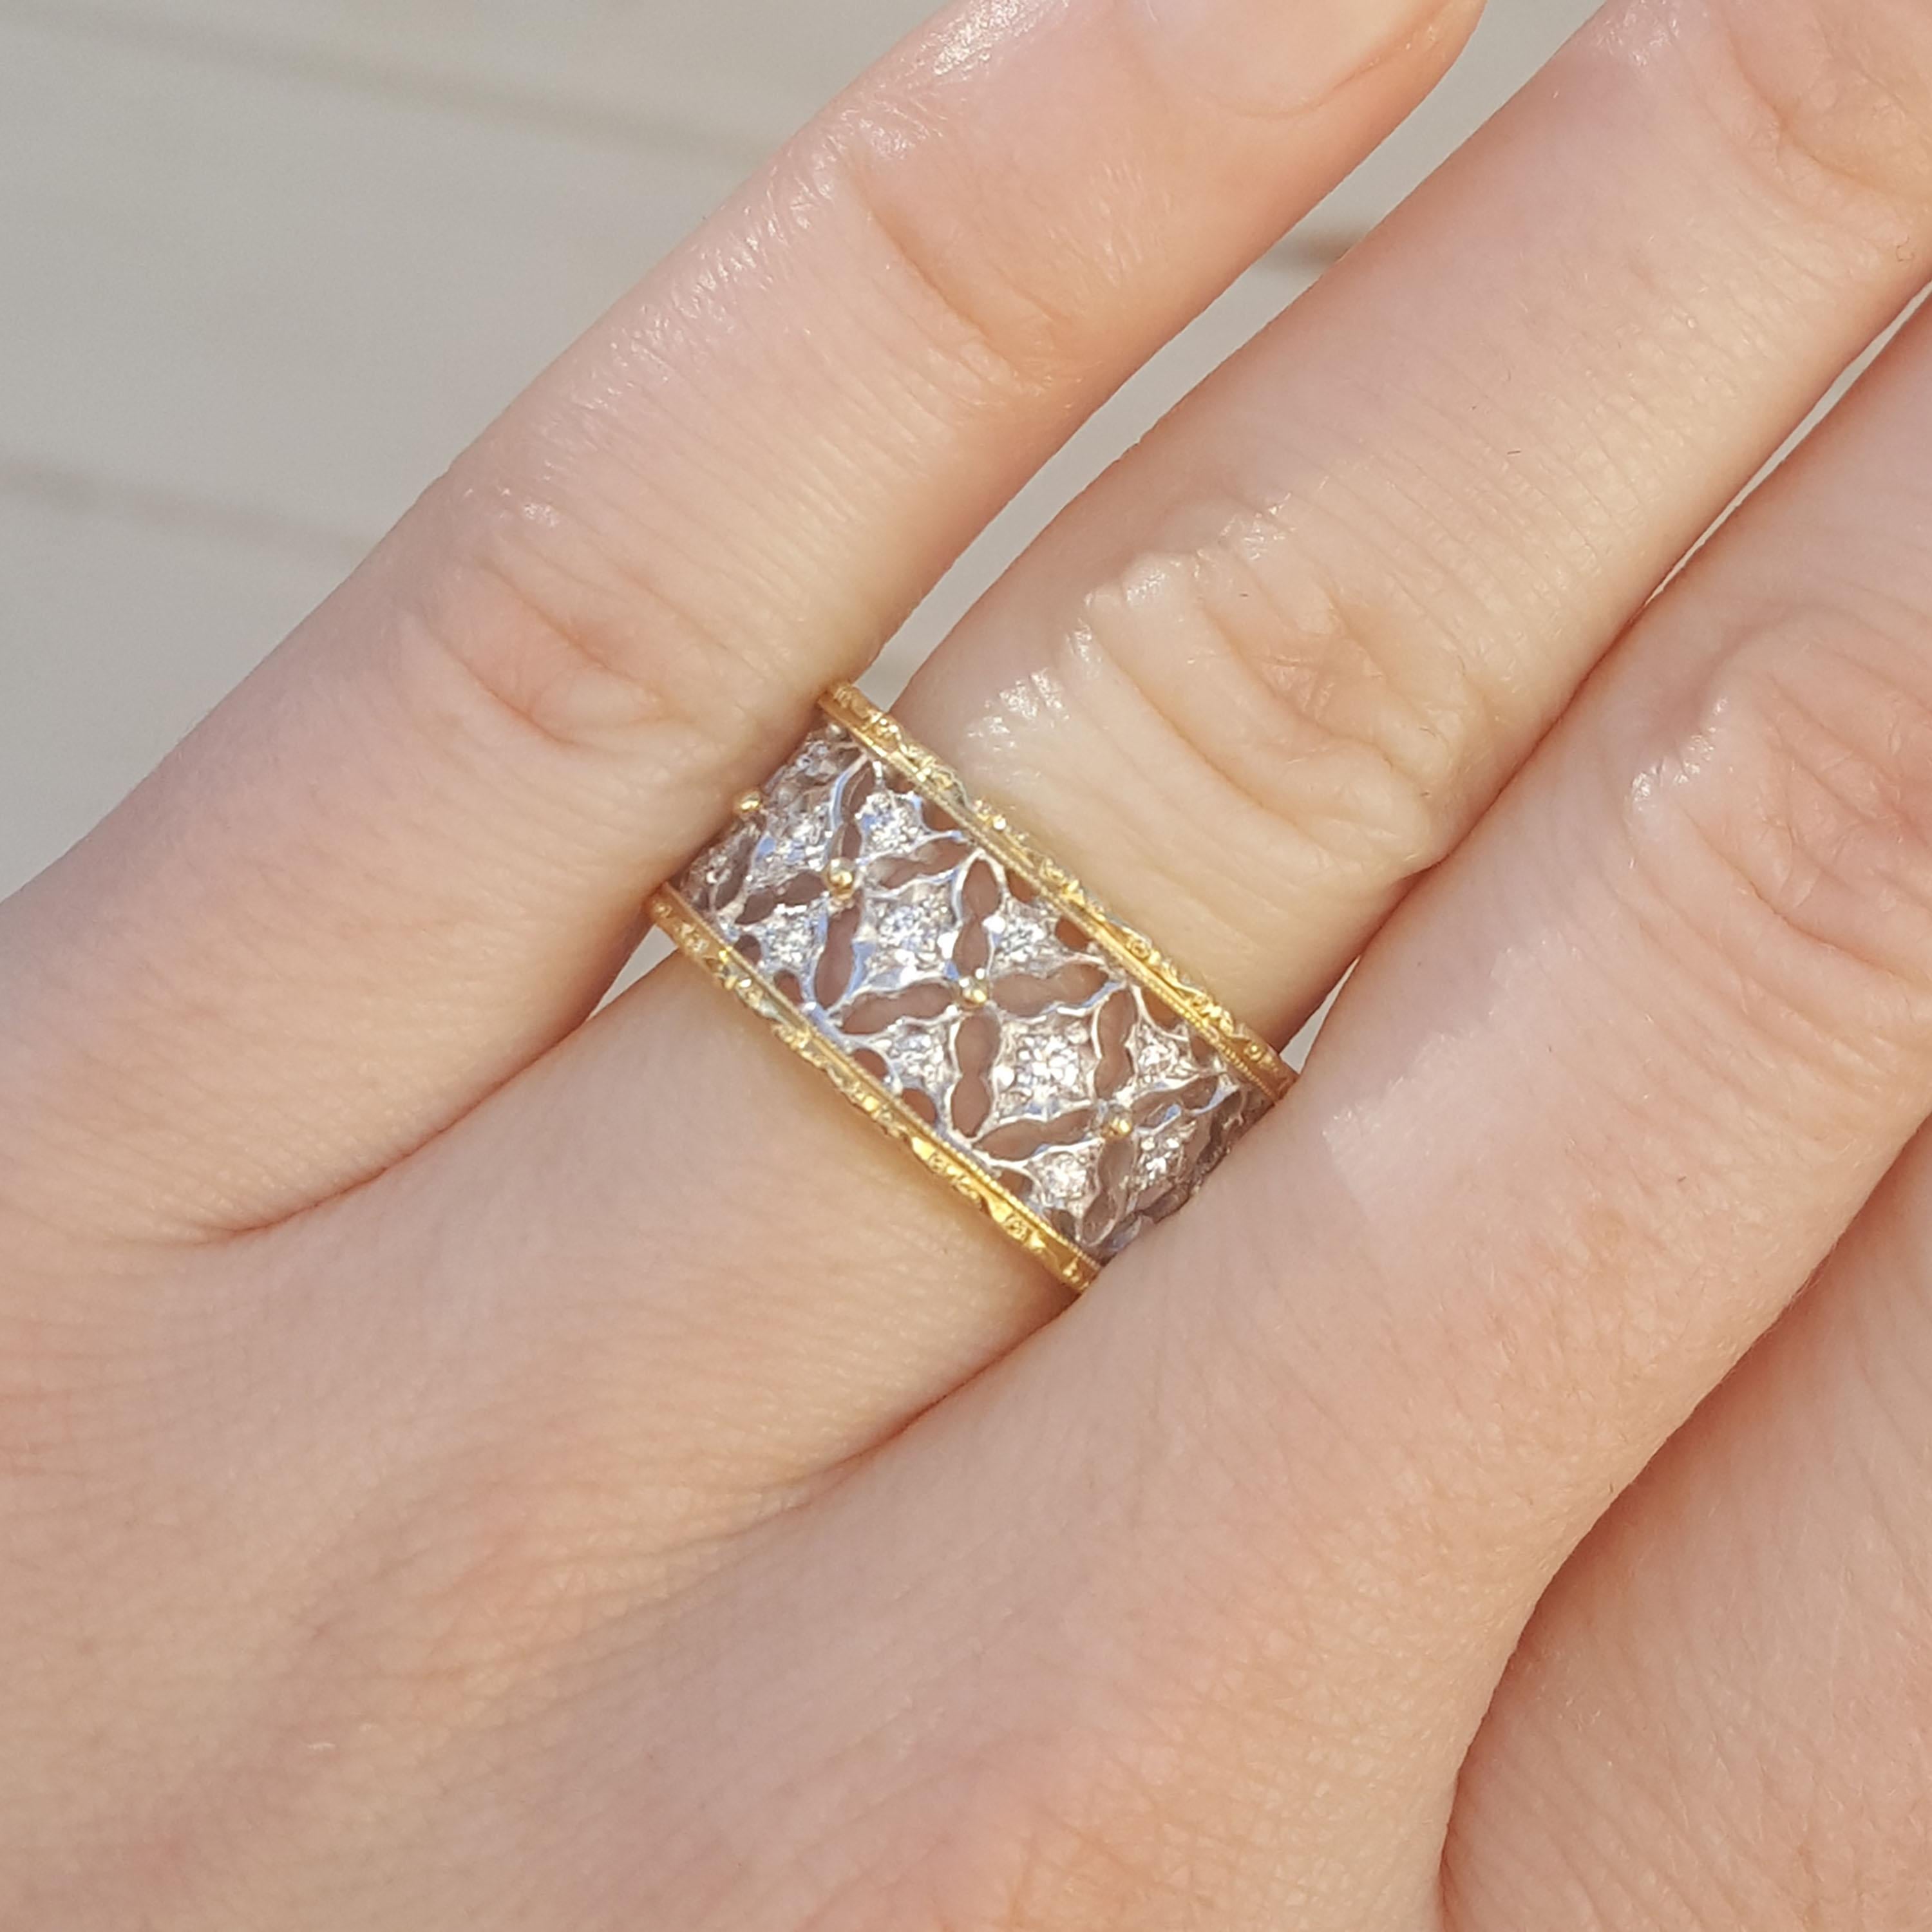 The Harlequin Band balances a high impact size and scale with a delicate approach. The casual elegance is certain to become a favorite look in your collection. The hand-fabricated and hand-engraved 18kt band sparkles with excellent quality